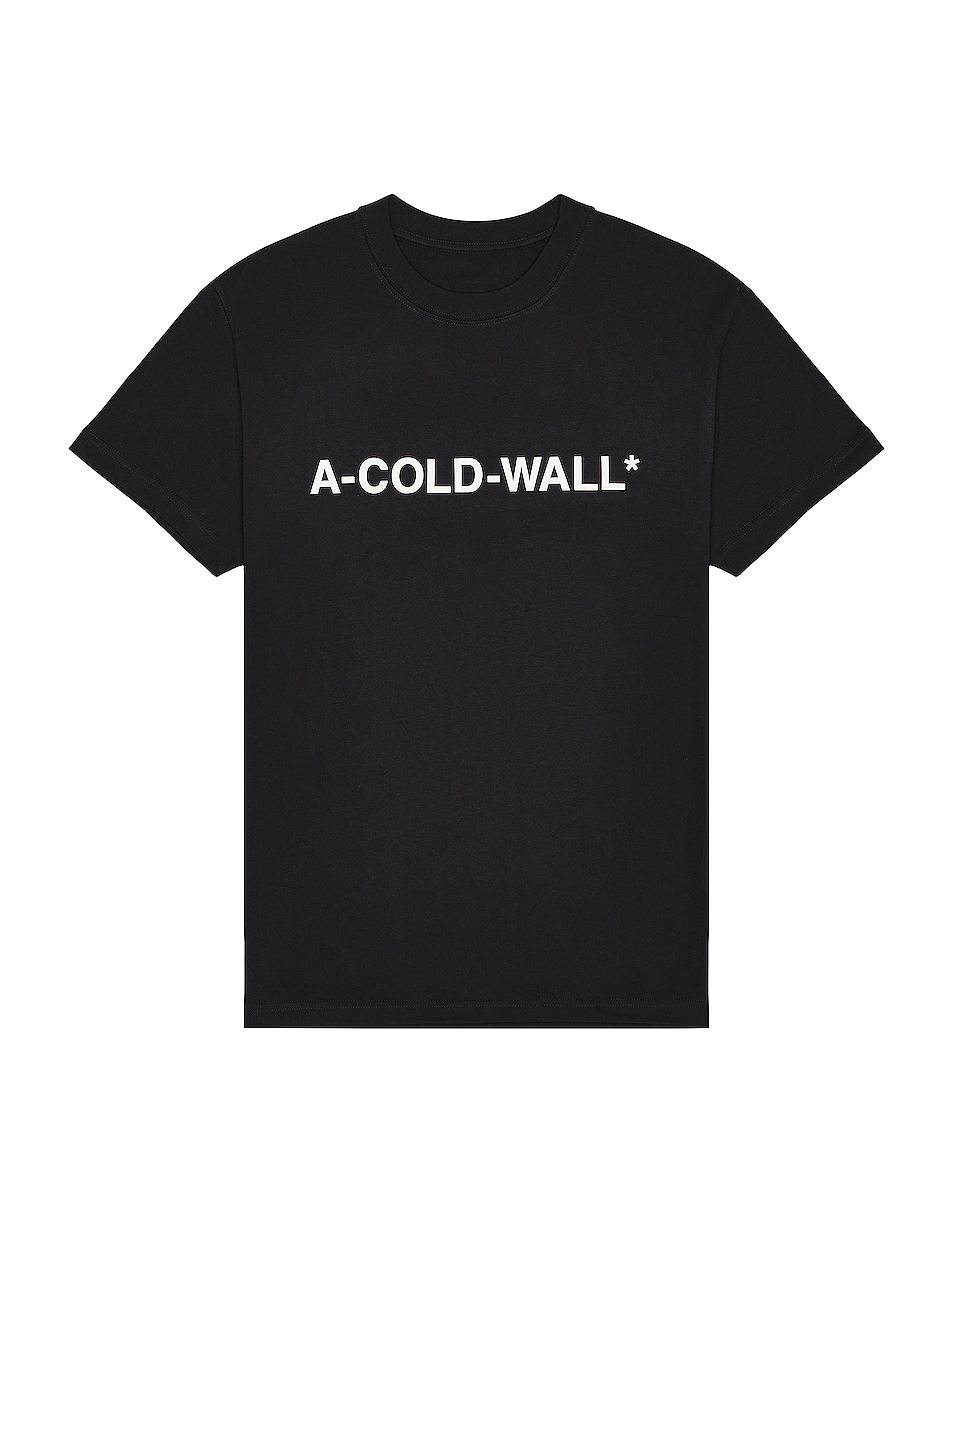 Image 1 of A-COLD-WALL* Essential Logo T-Shirt in Black